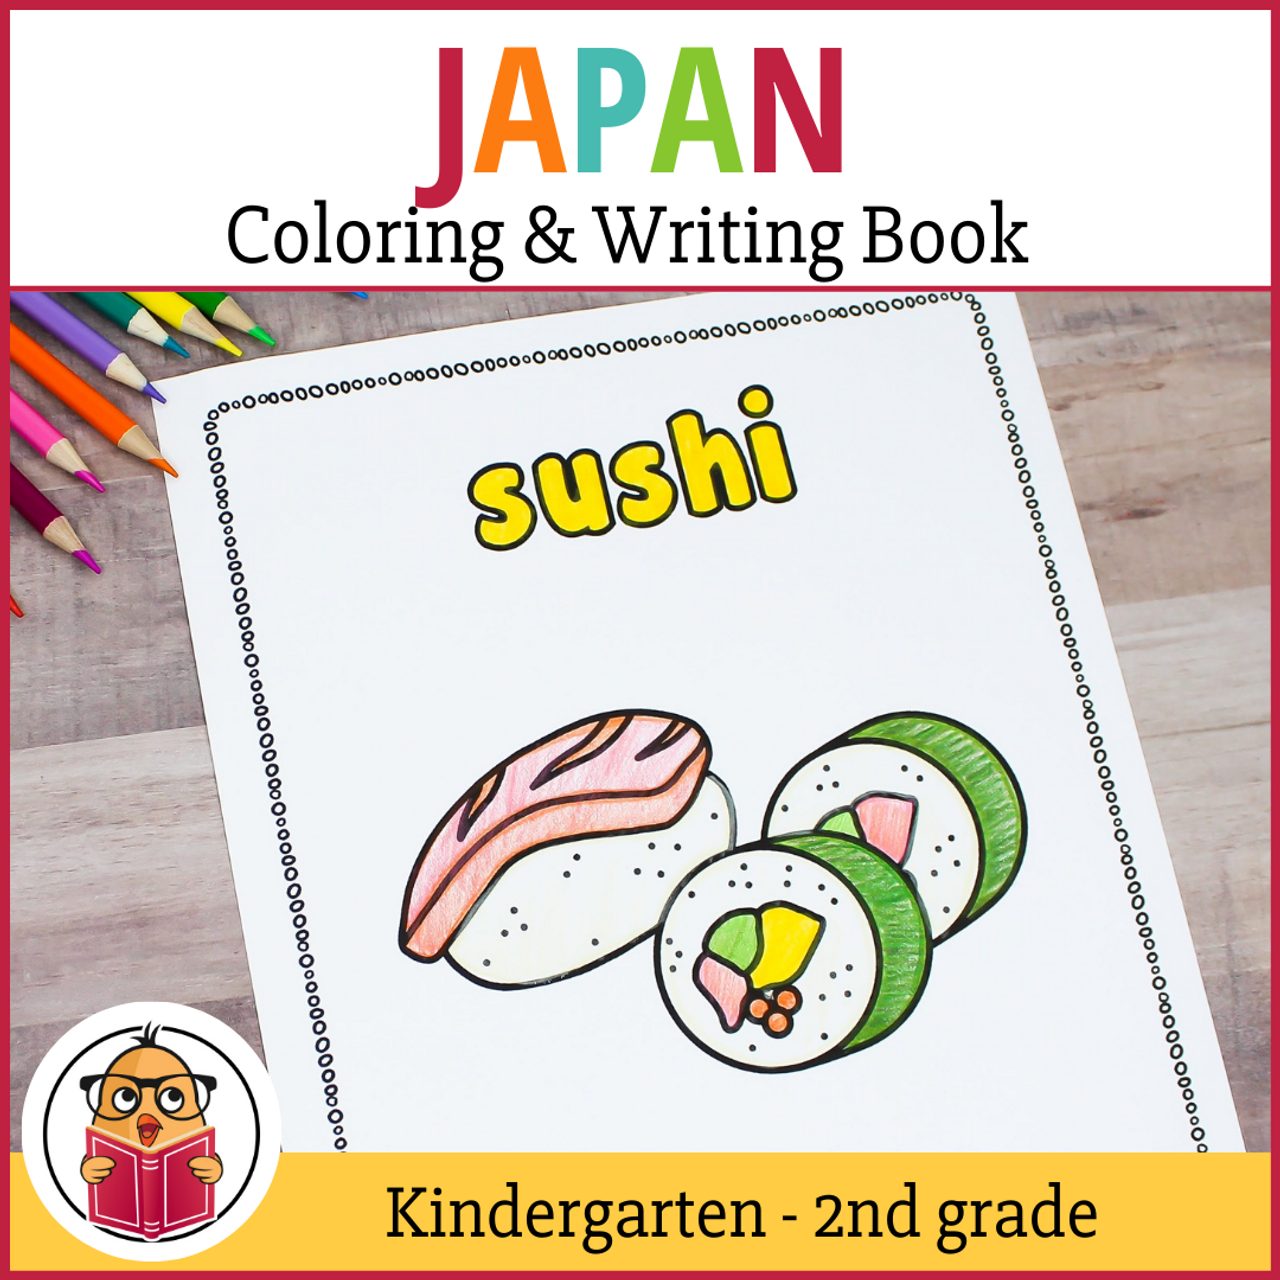 Japan Coloring and Writing Book